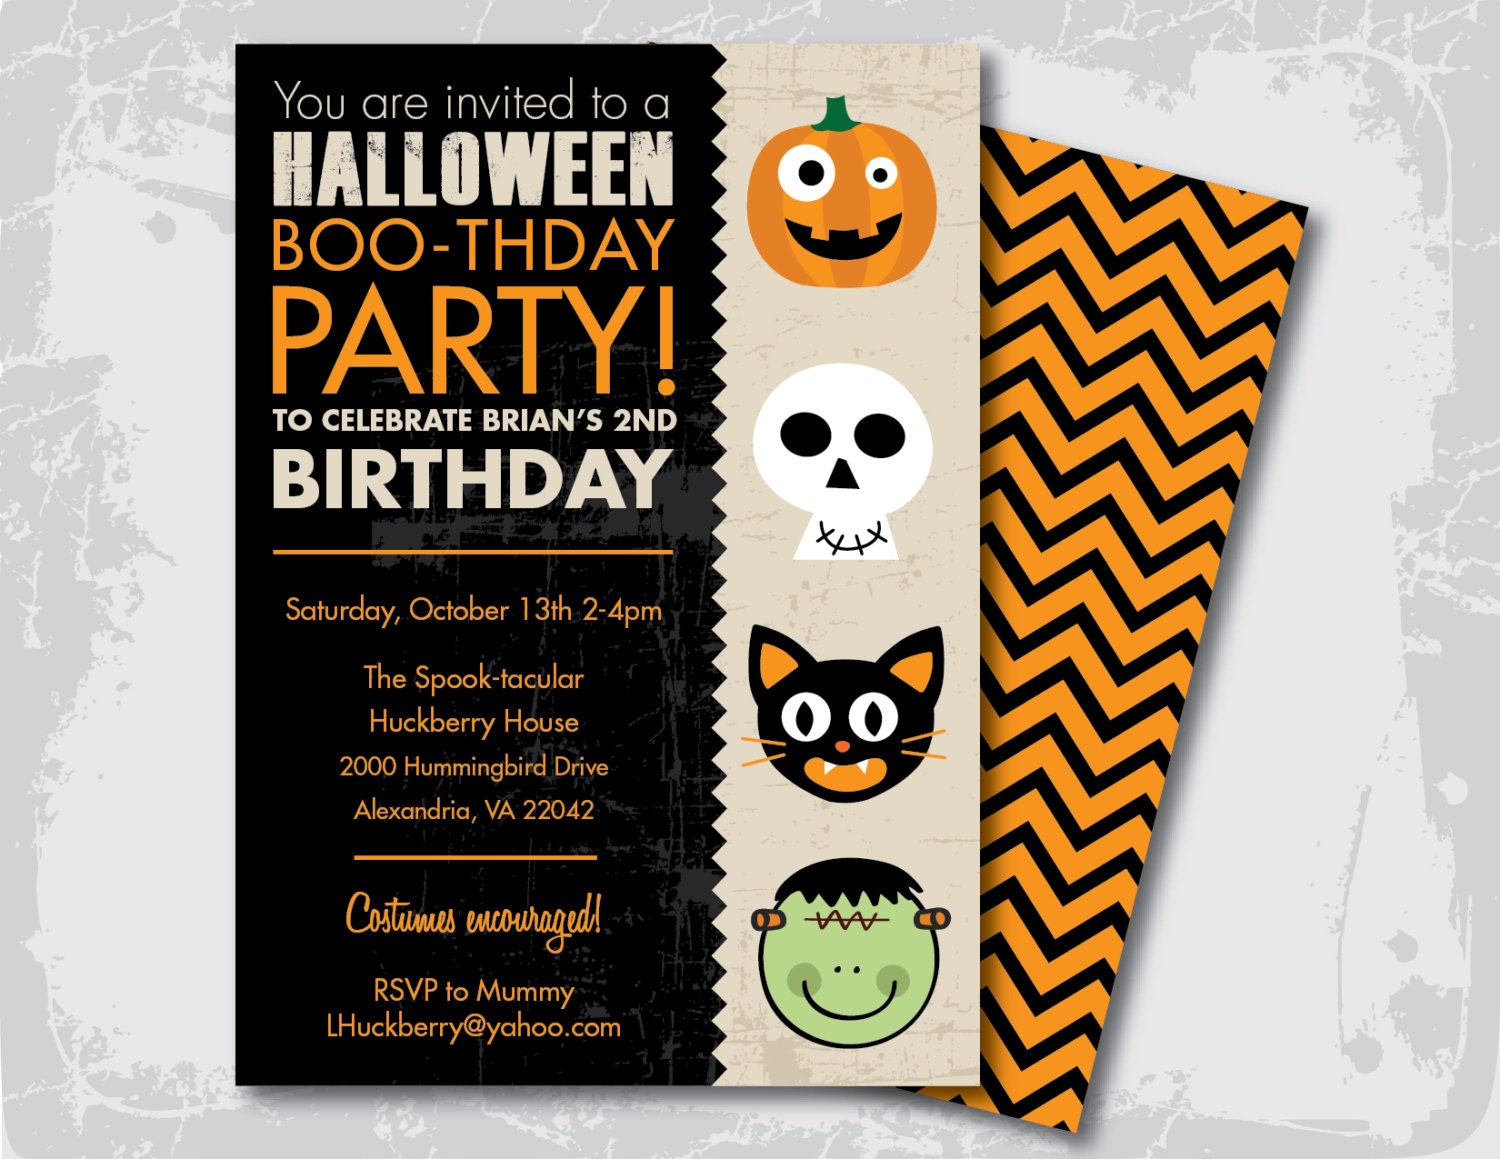 party-planning-center-free-printable-halloween-invitations